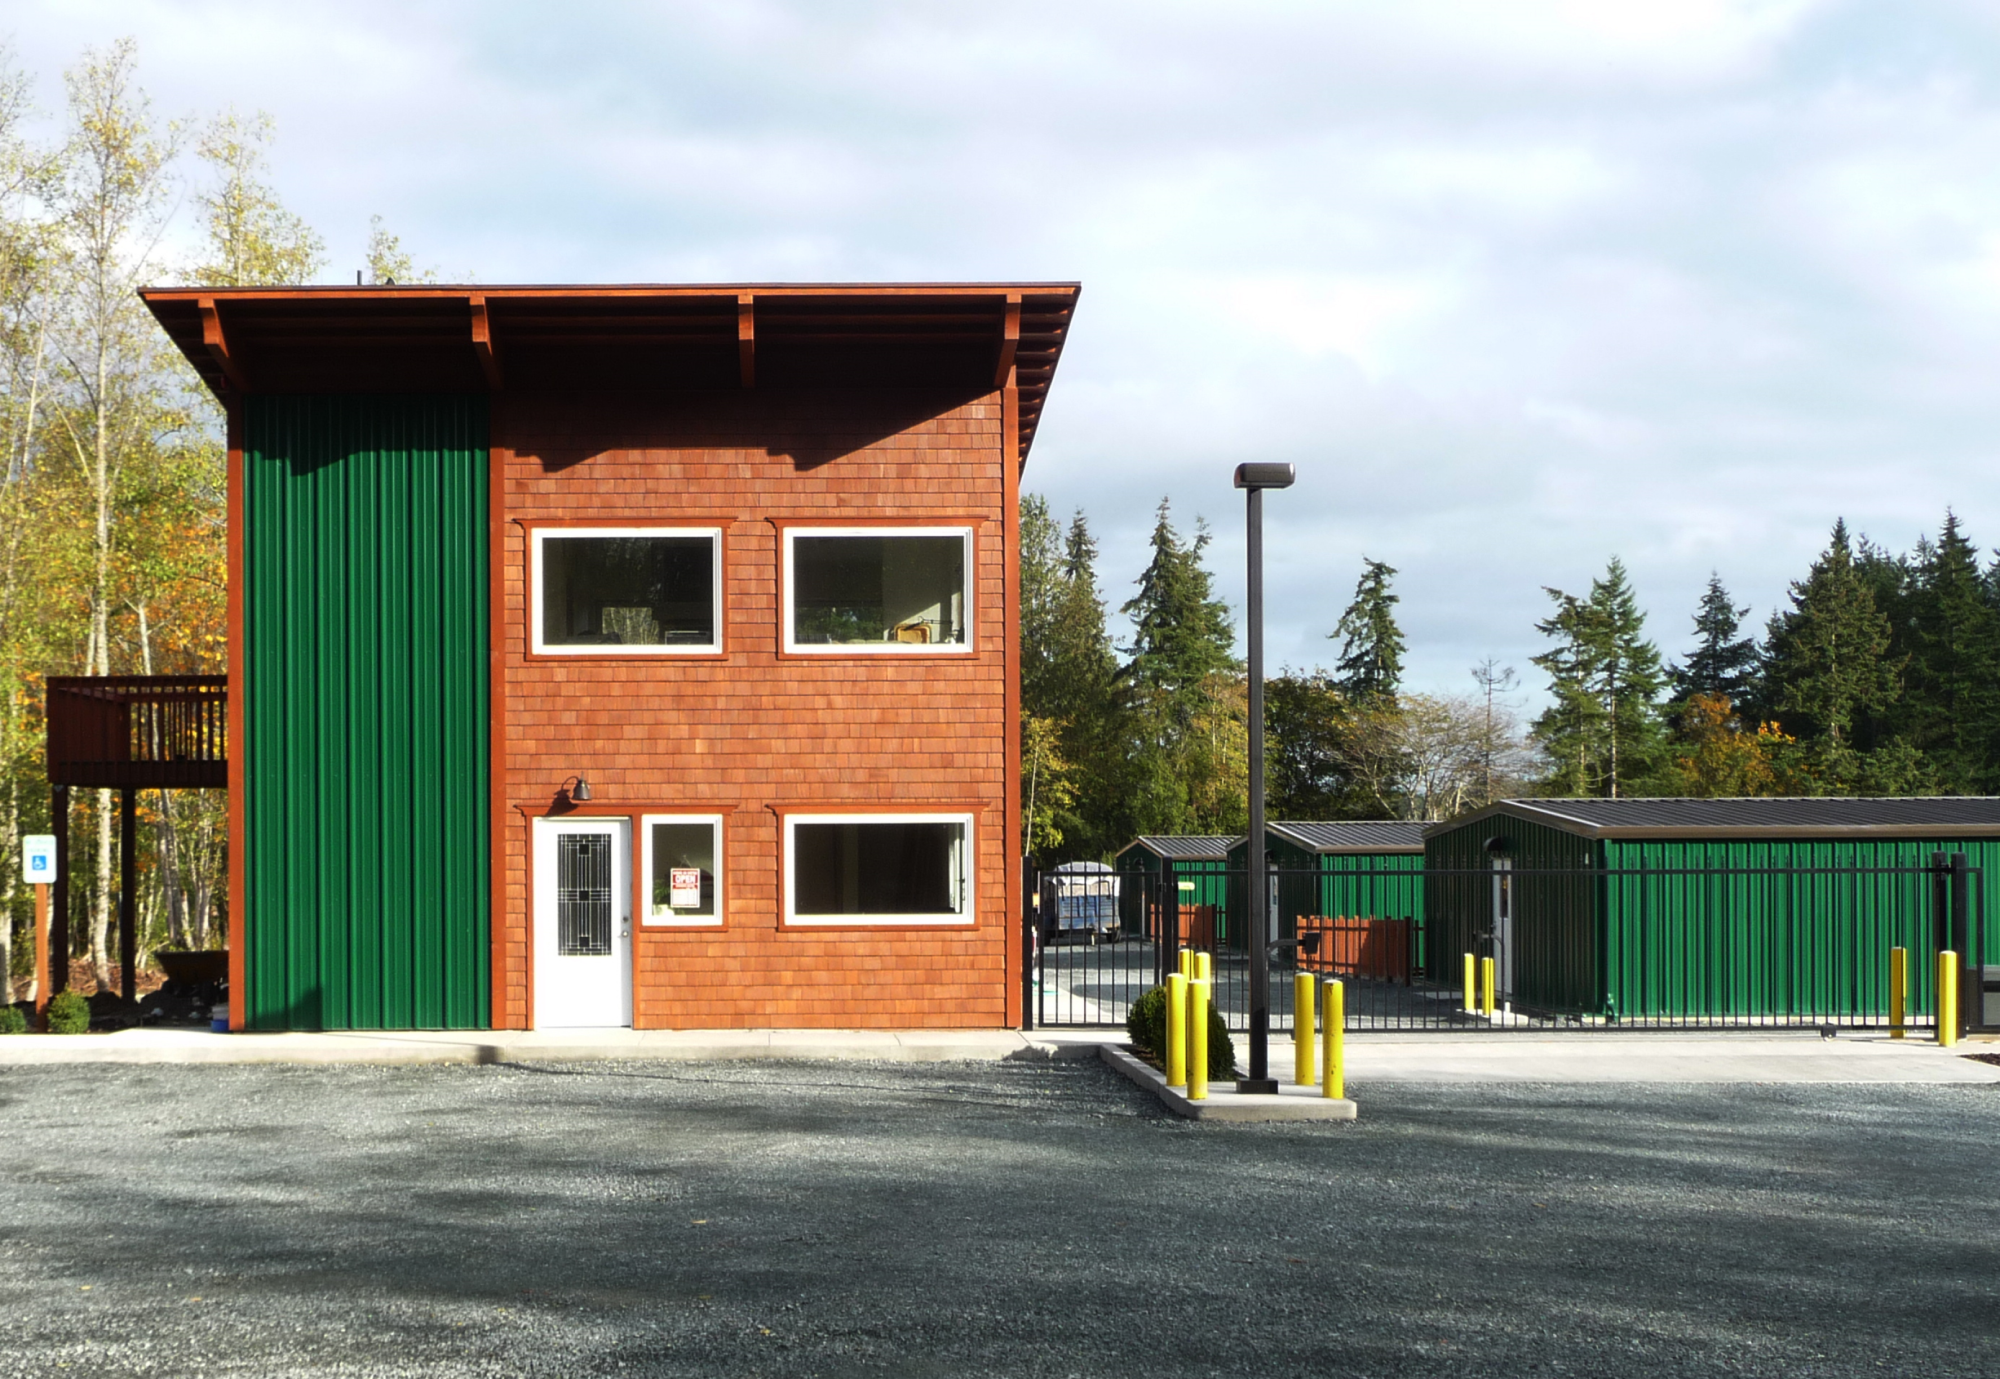 South Whidbey Self Storage